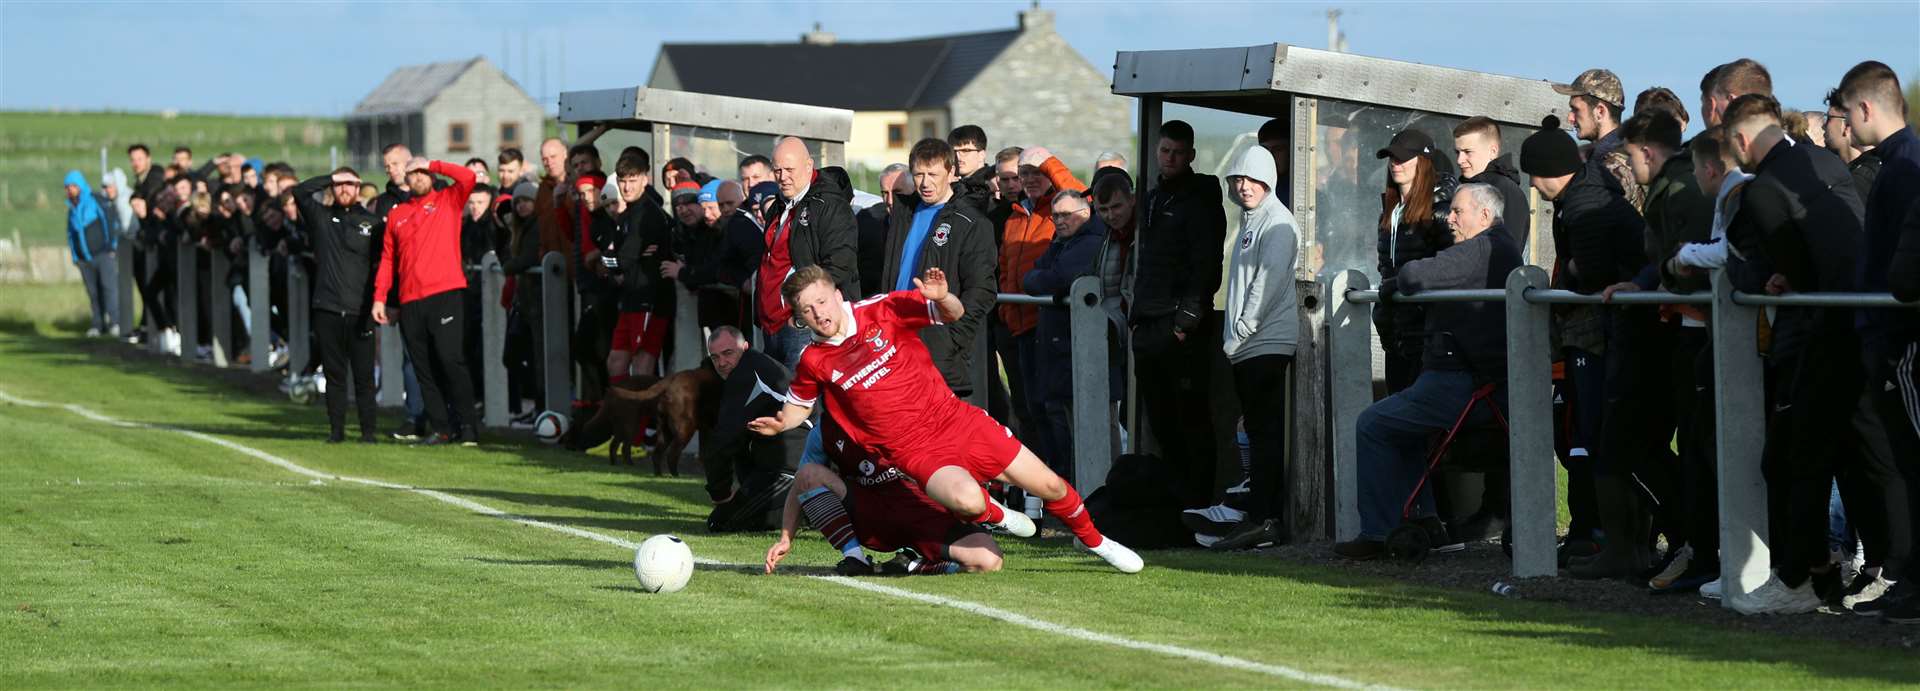 Korbyn Cameron of Wick Groats is fouled by Pentland United's Sean Campbell on the touchline during Tuesday's semi-final at Ham Park. Picture: James Gunn